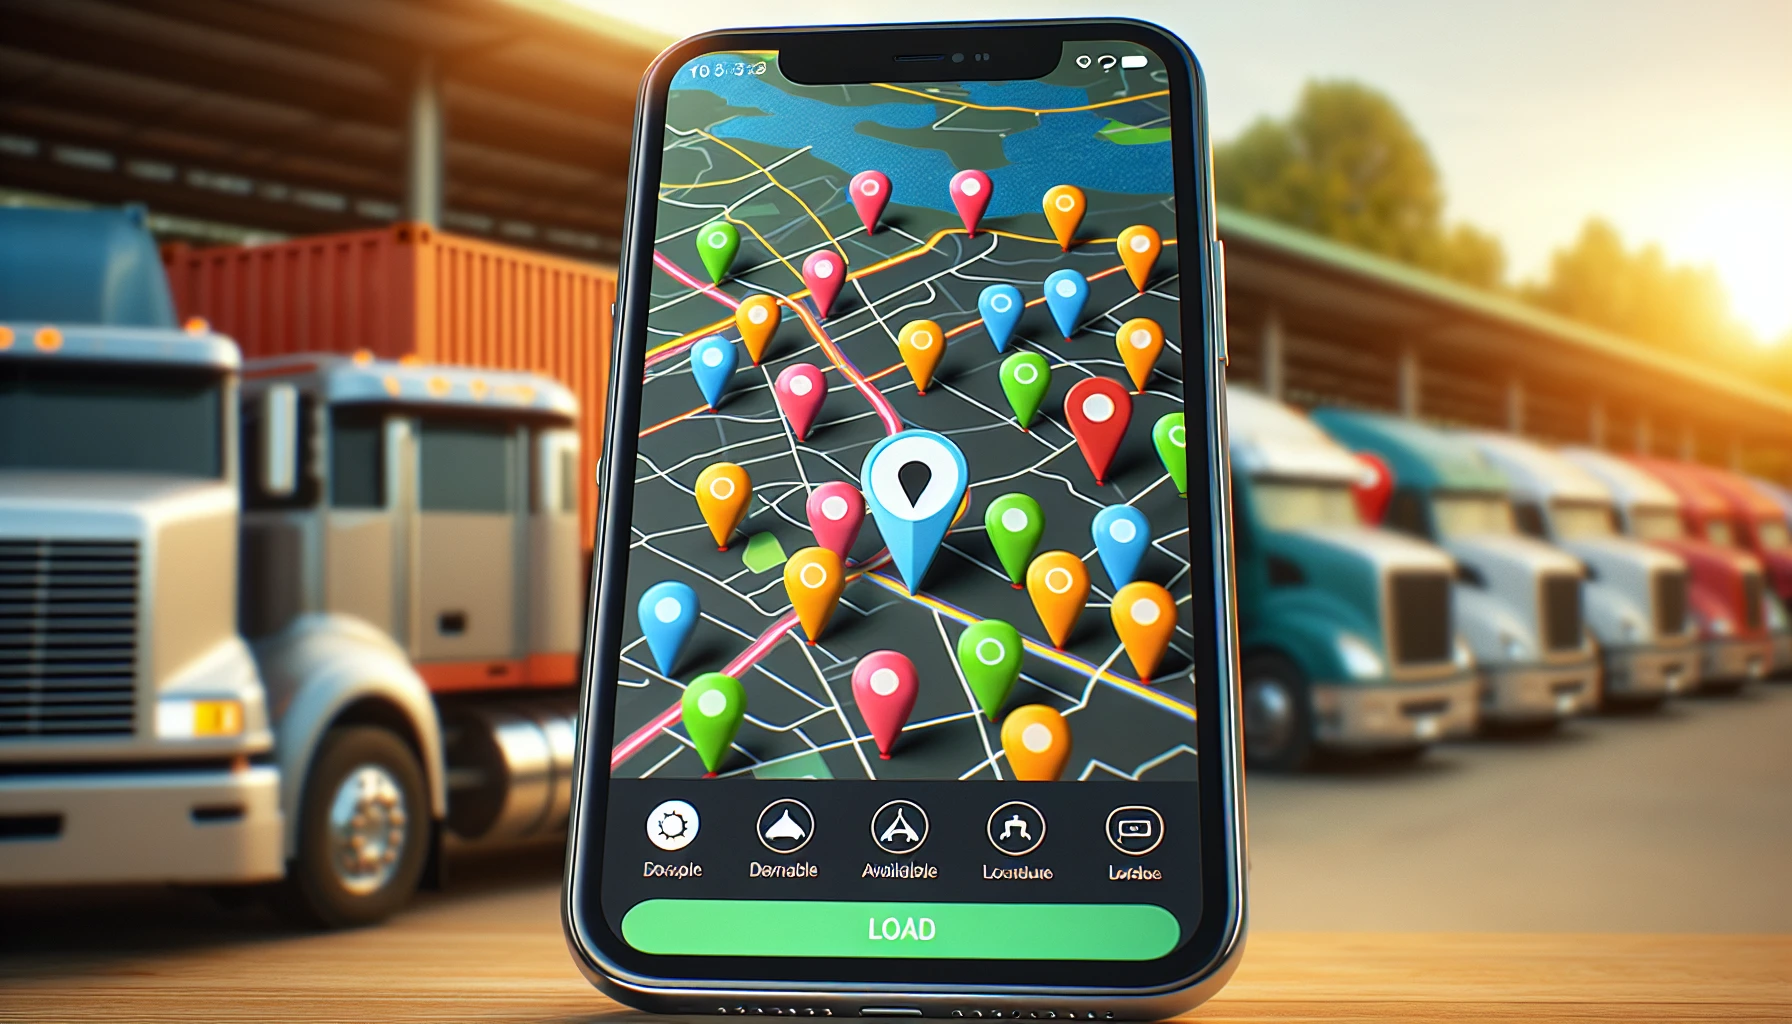 TruckersEdge mobile app with nearby loads feature